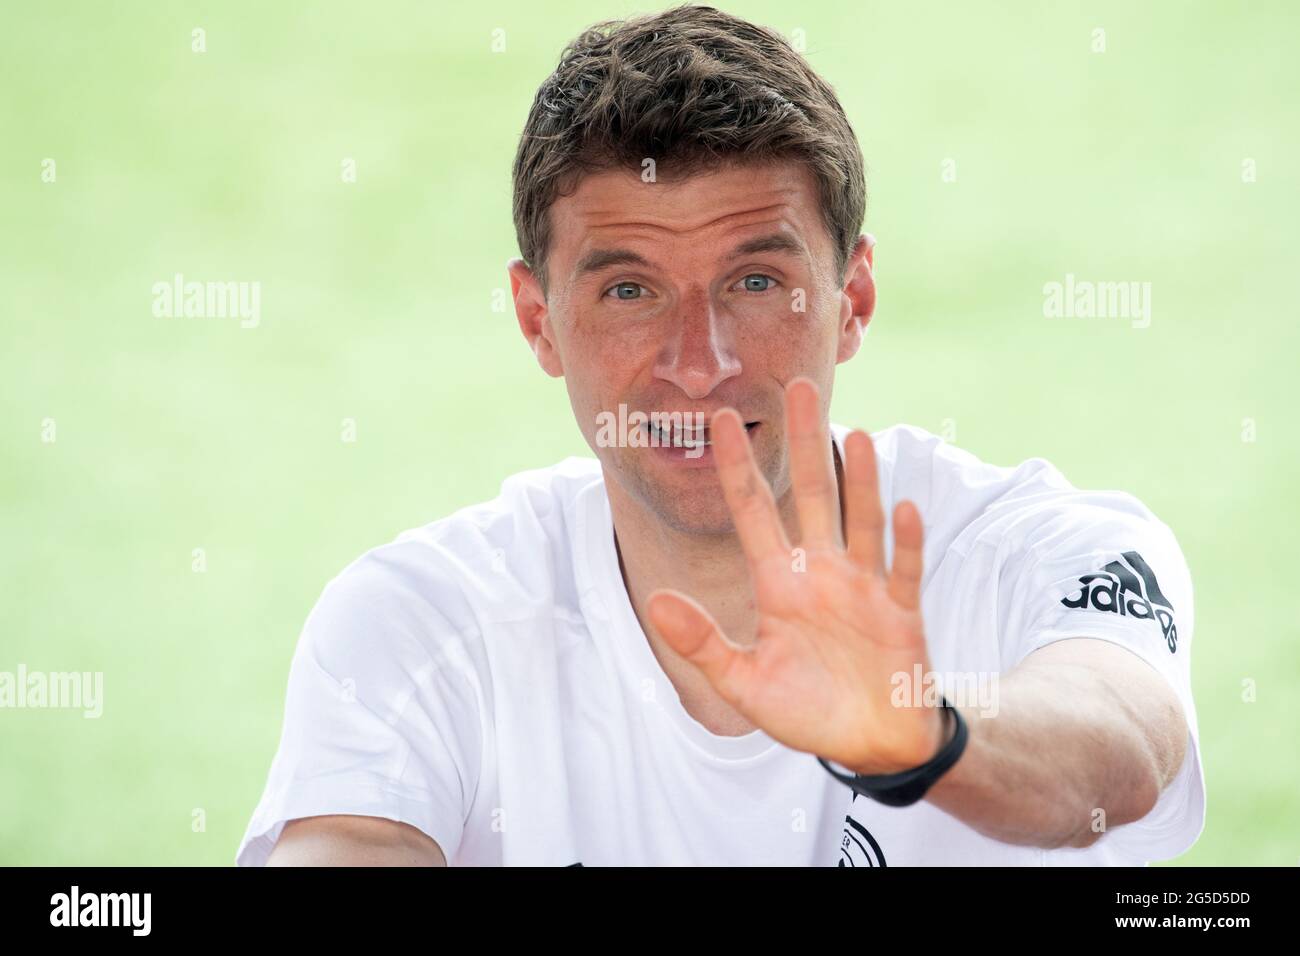 Herzogenaurach, Germany. 26th June, 2021. Football: European Championship, autograph session of the German national team at the Adi Dassler sports ground. Germany's Thomas Müller waves to a fan. Credit: Federico Gambarini/dpa/Alamy Live News Stock Photo